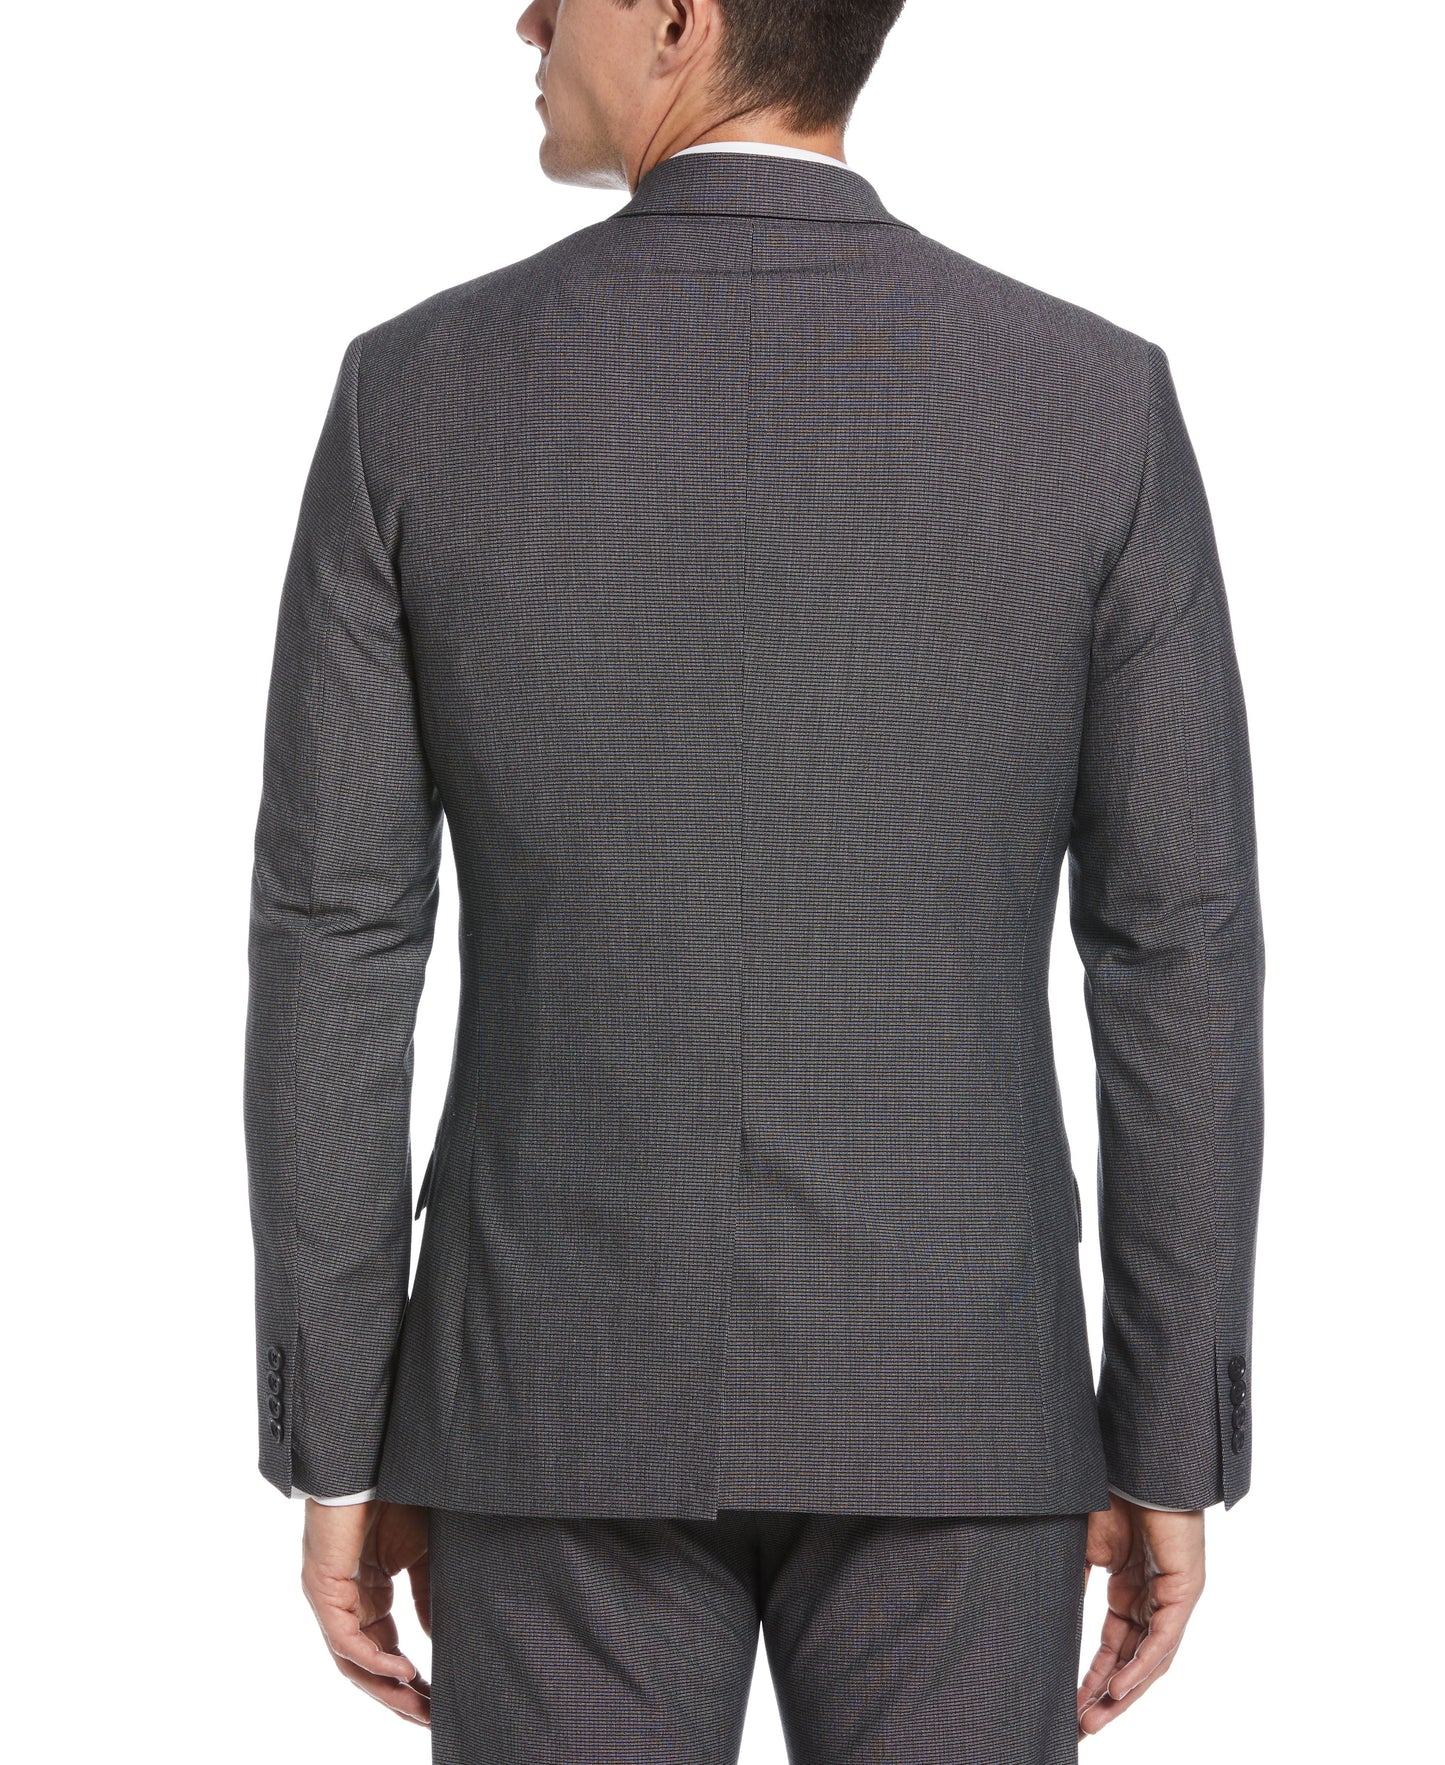 Very Slim Fit Stretch Micro Houndstooth Suit